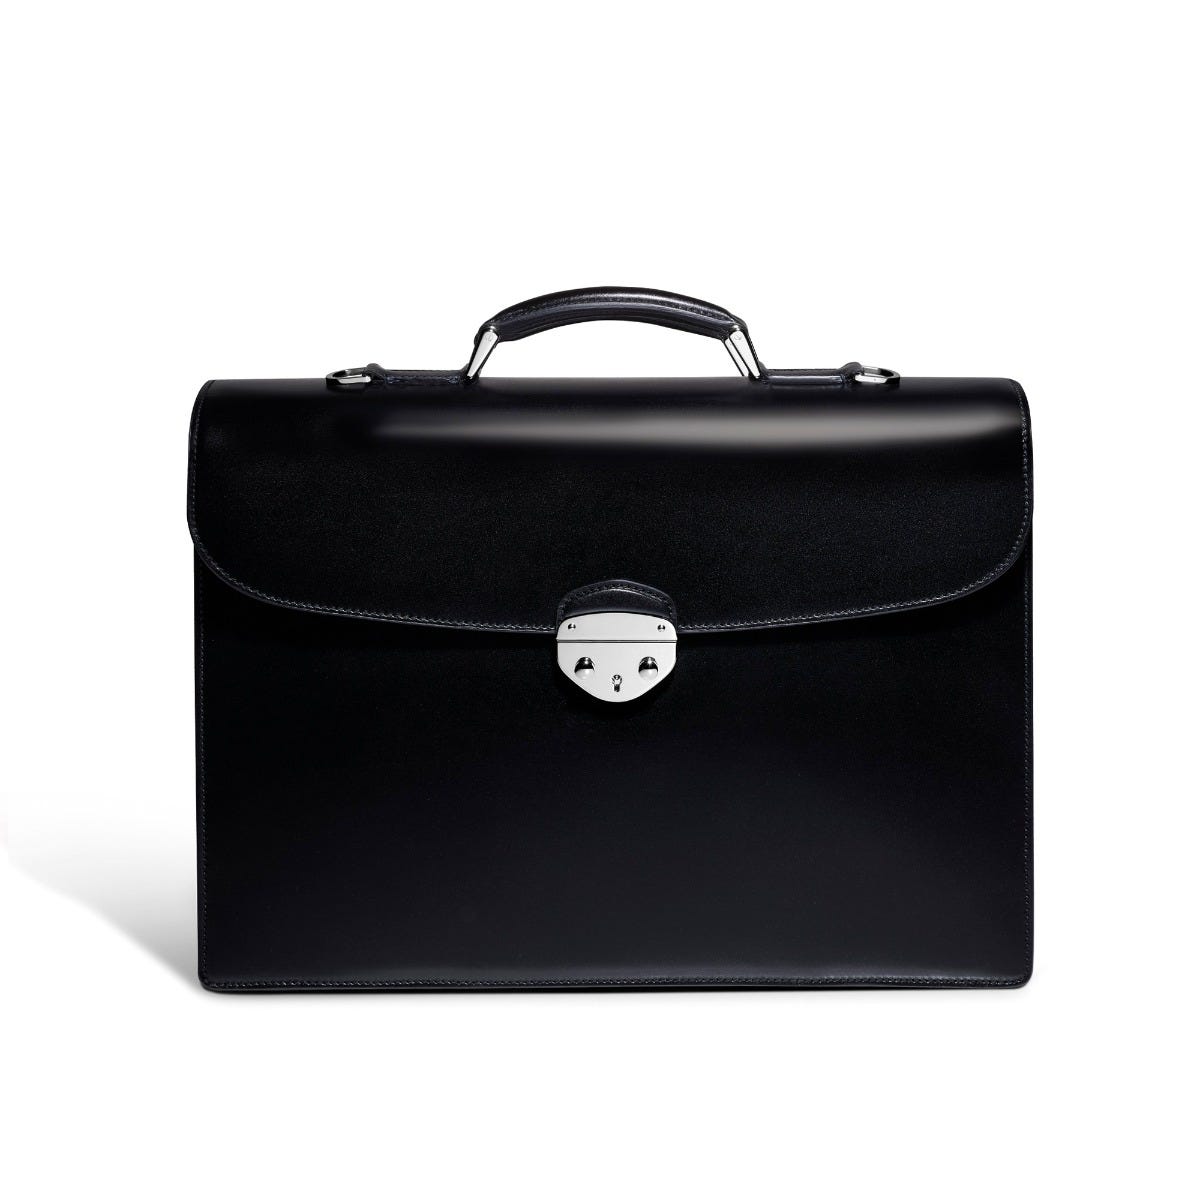 Hanover 2 Briefcase in Saddle Leather